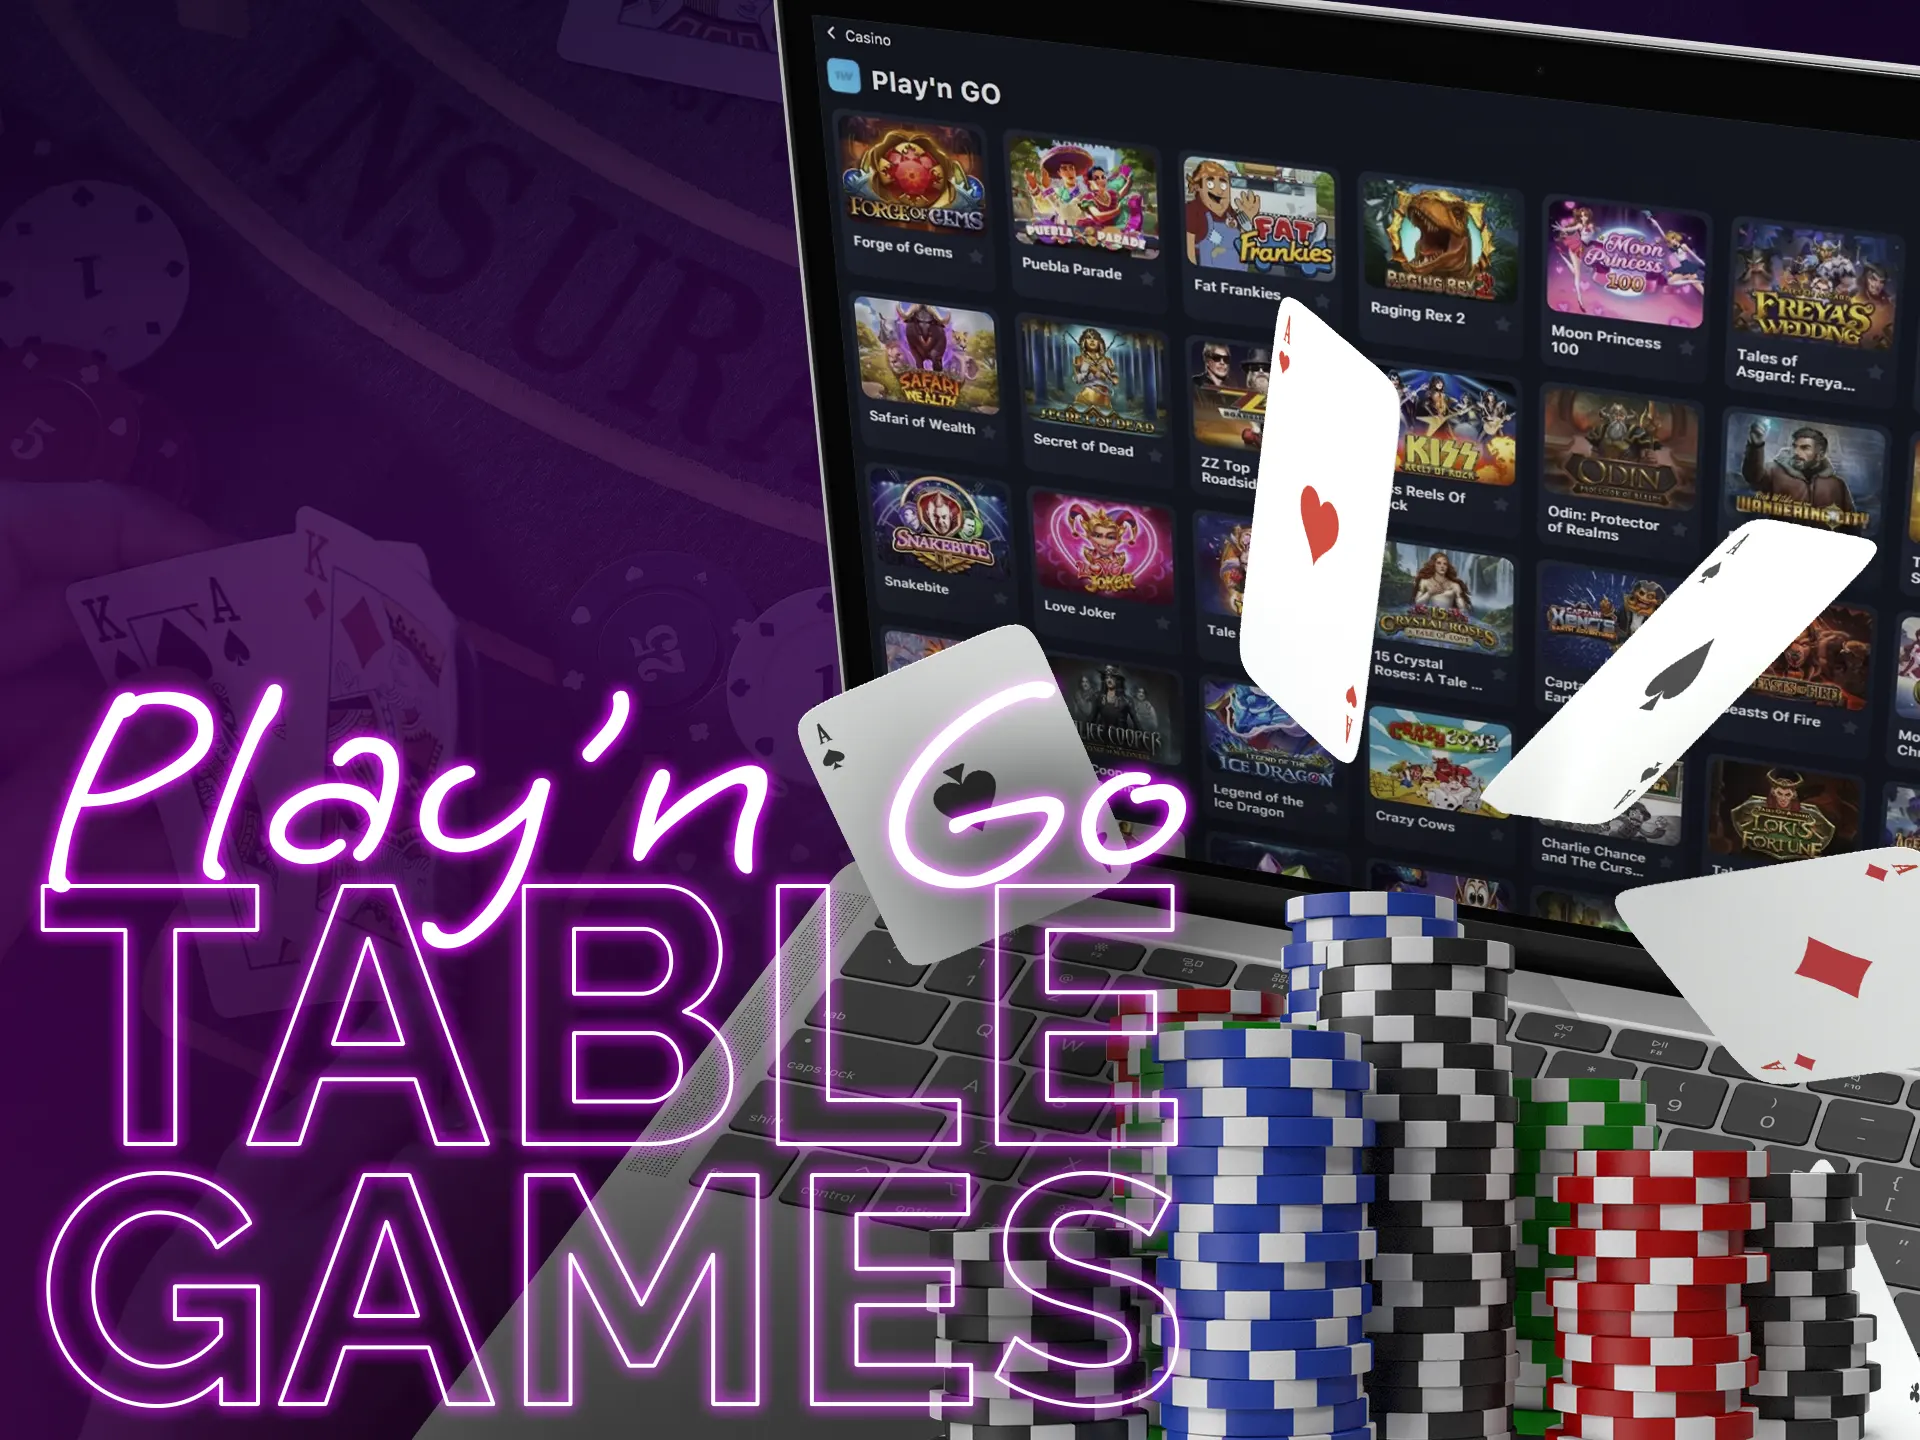 Play'n Go offers its players many popular casino games.